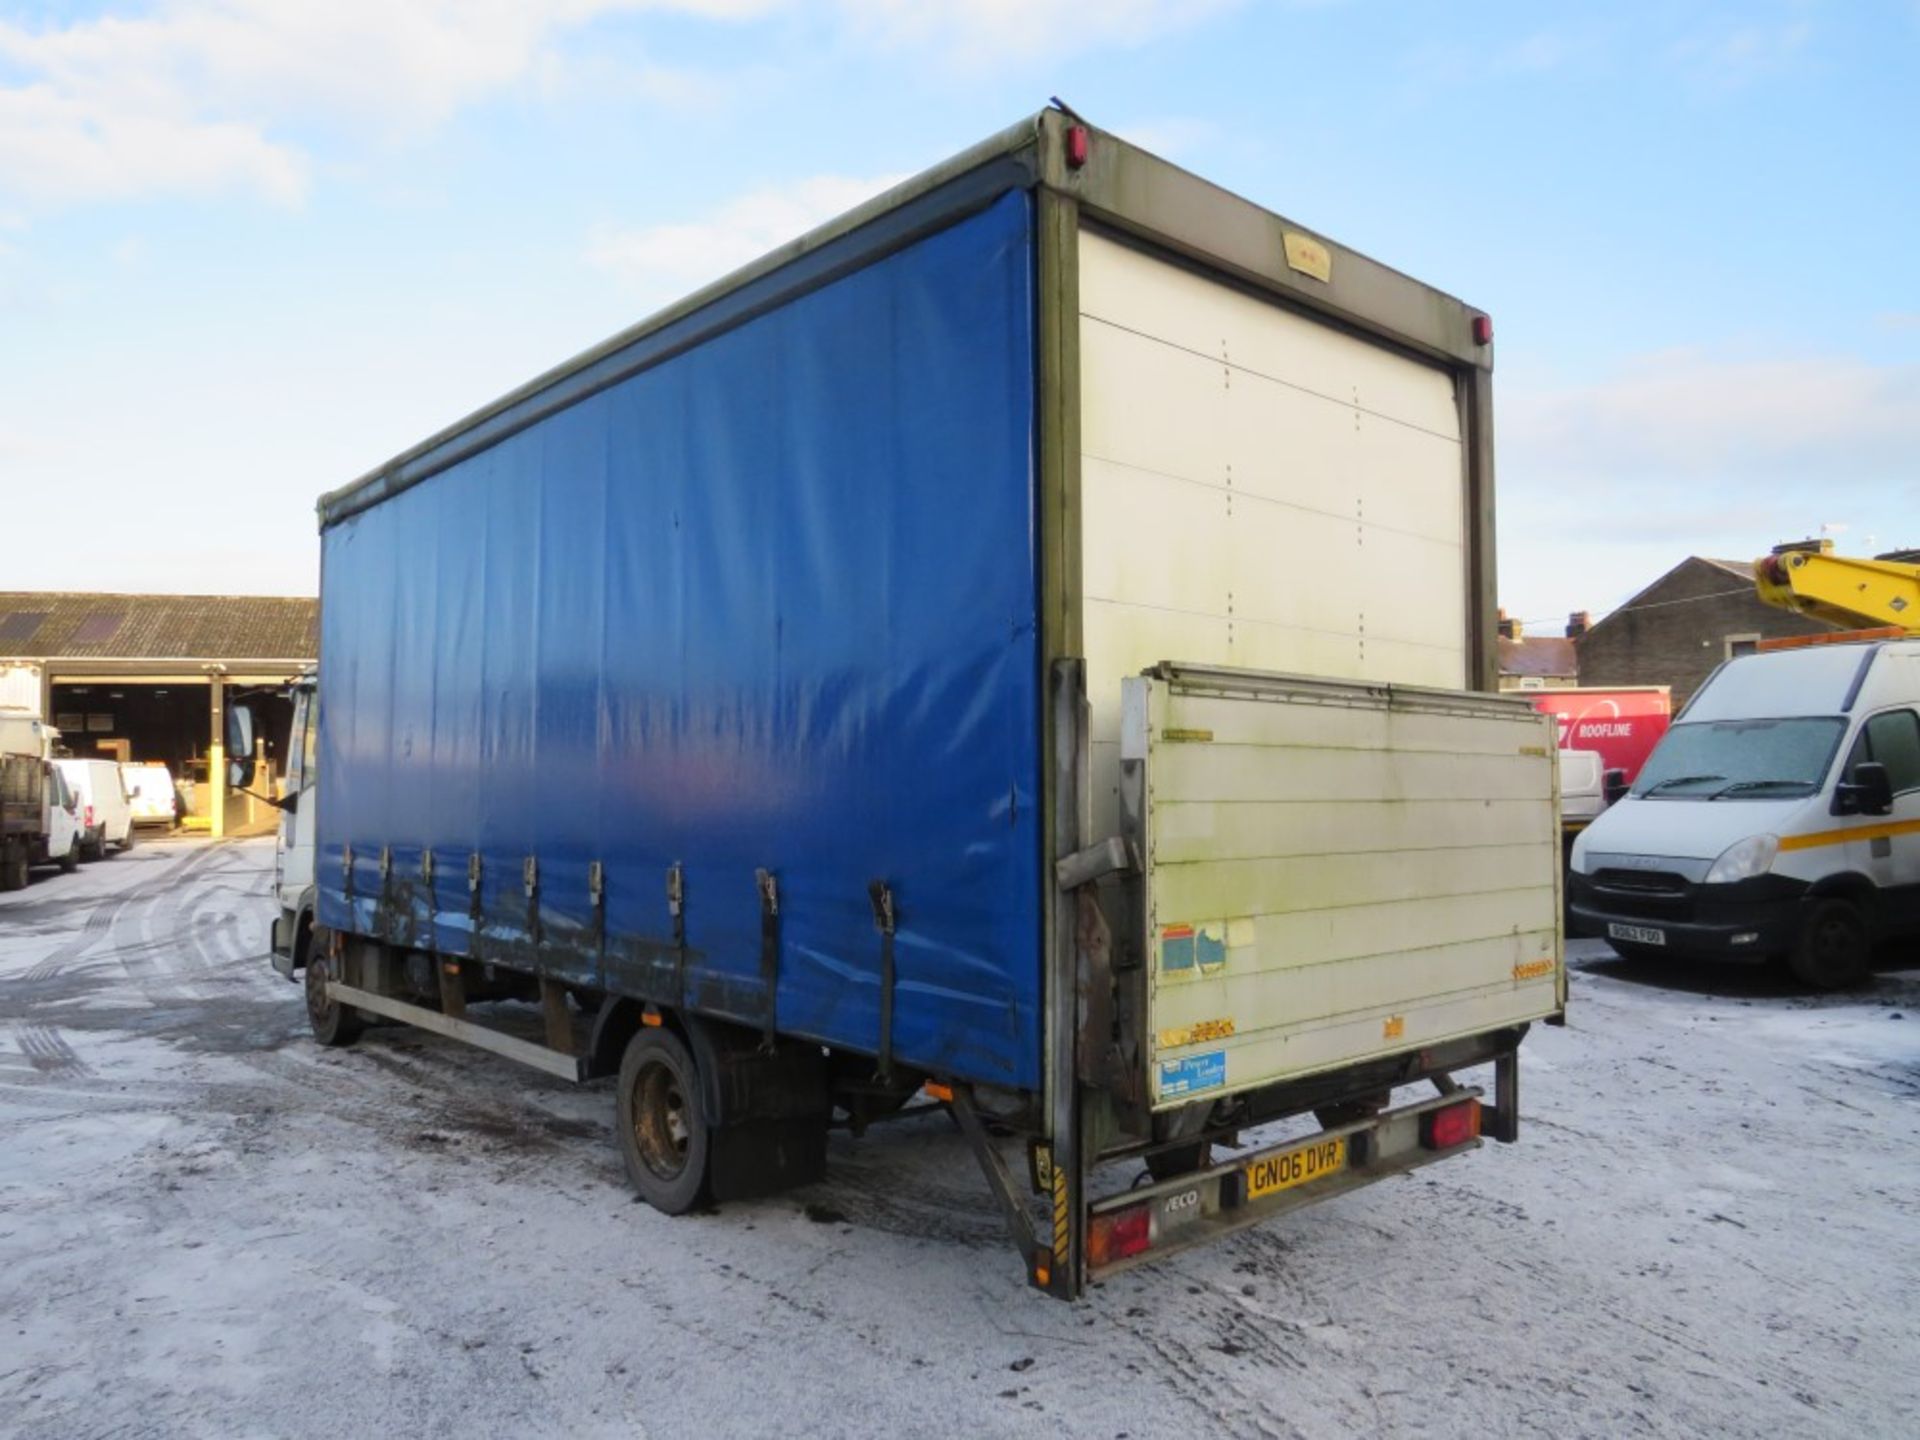 06 reg IVECO CURTAIN SIDE C/W TAIL LIFT, 1ST REG 04/06, 559437KM, V5 HERE, 3 FORMER KEEPERS [NO - Image 3 of 6